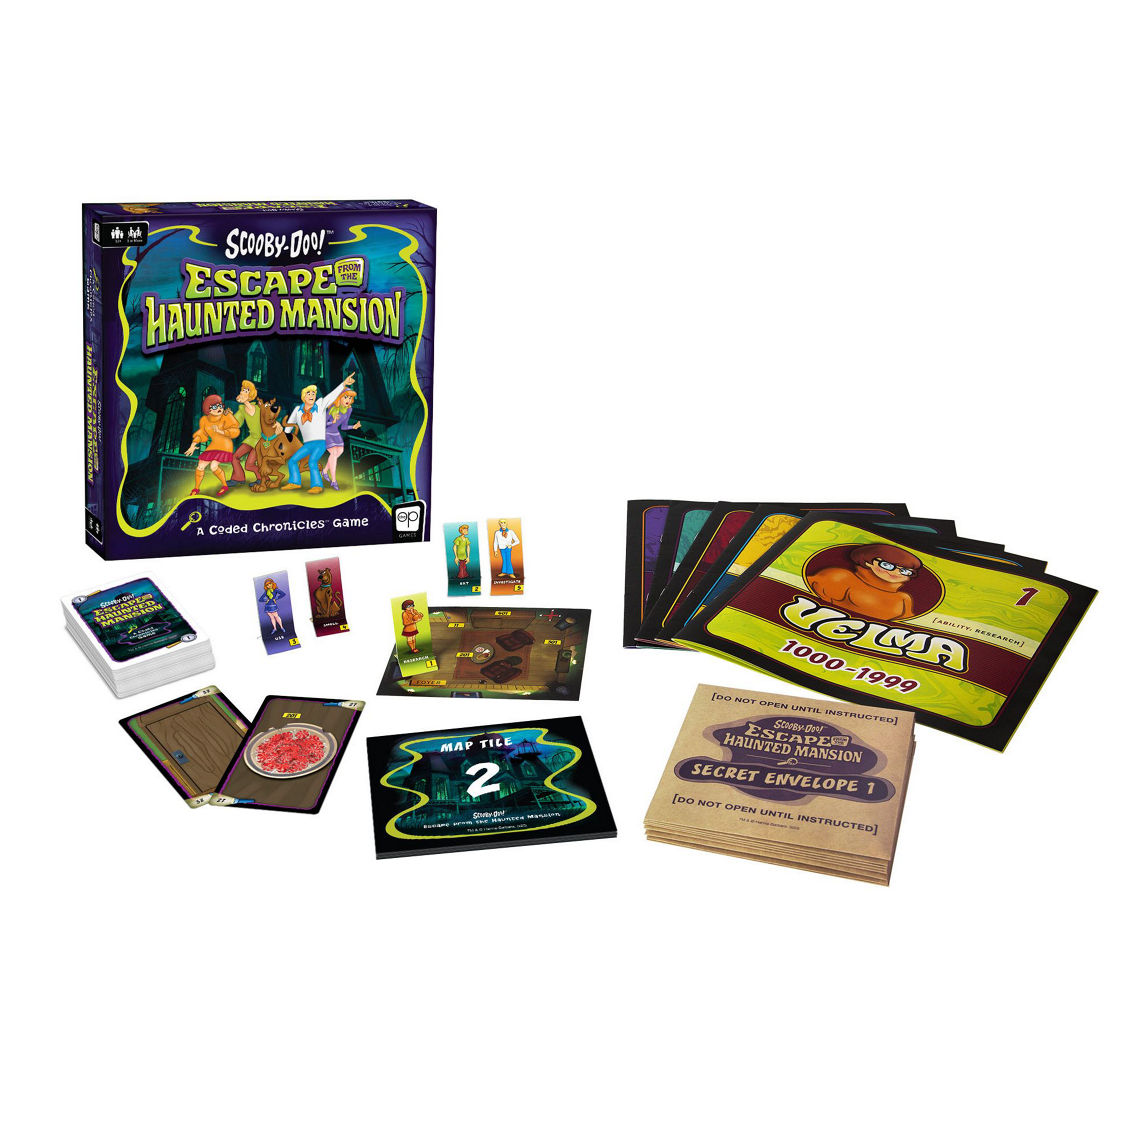 USAopoly Scooby-Doo! - Escape from the Haunted Mansion - Image 5 of 5